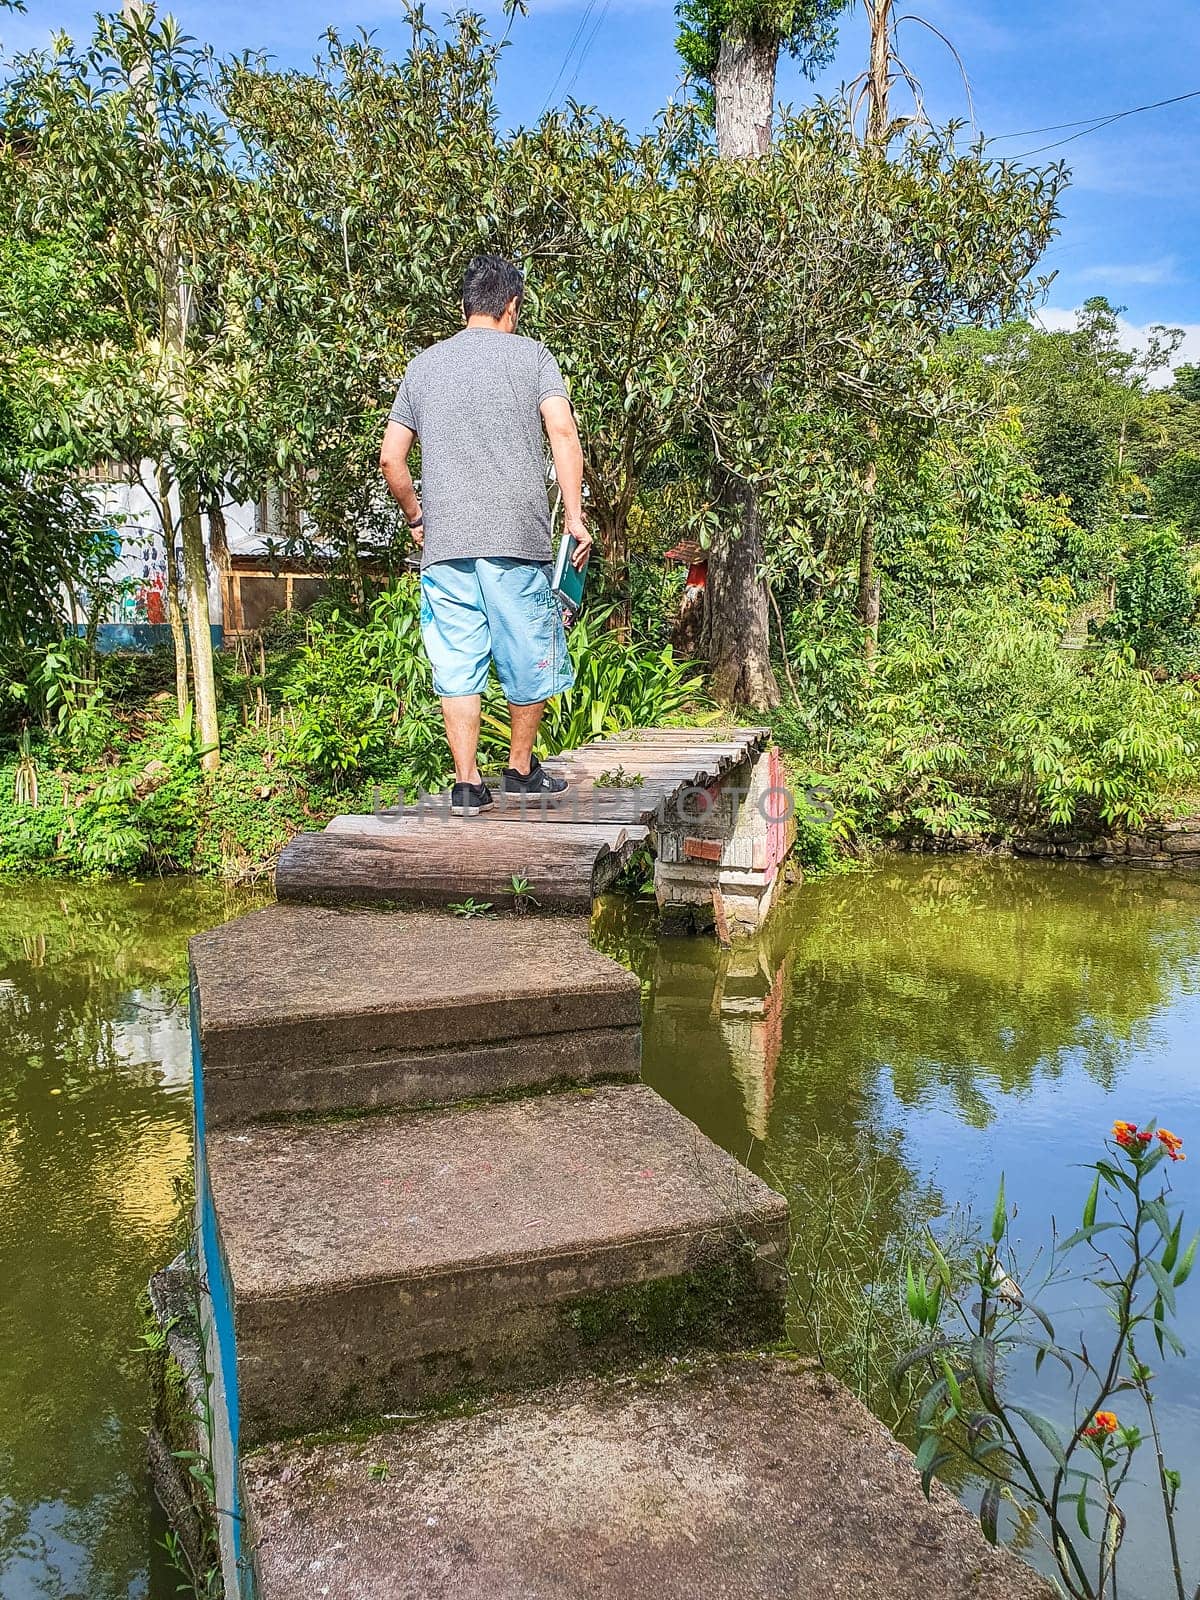 Adult male approaches a rustic wooden bridge across a tranquil pond surrounded by lush greenery